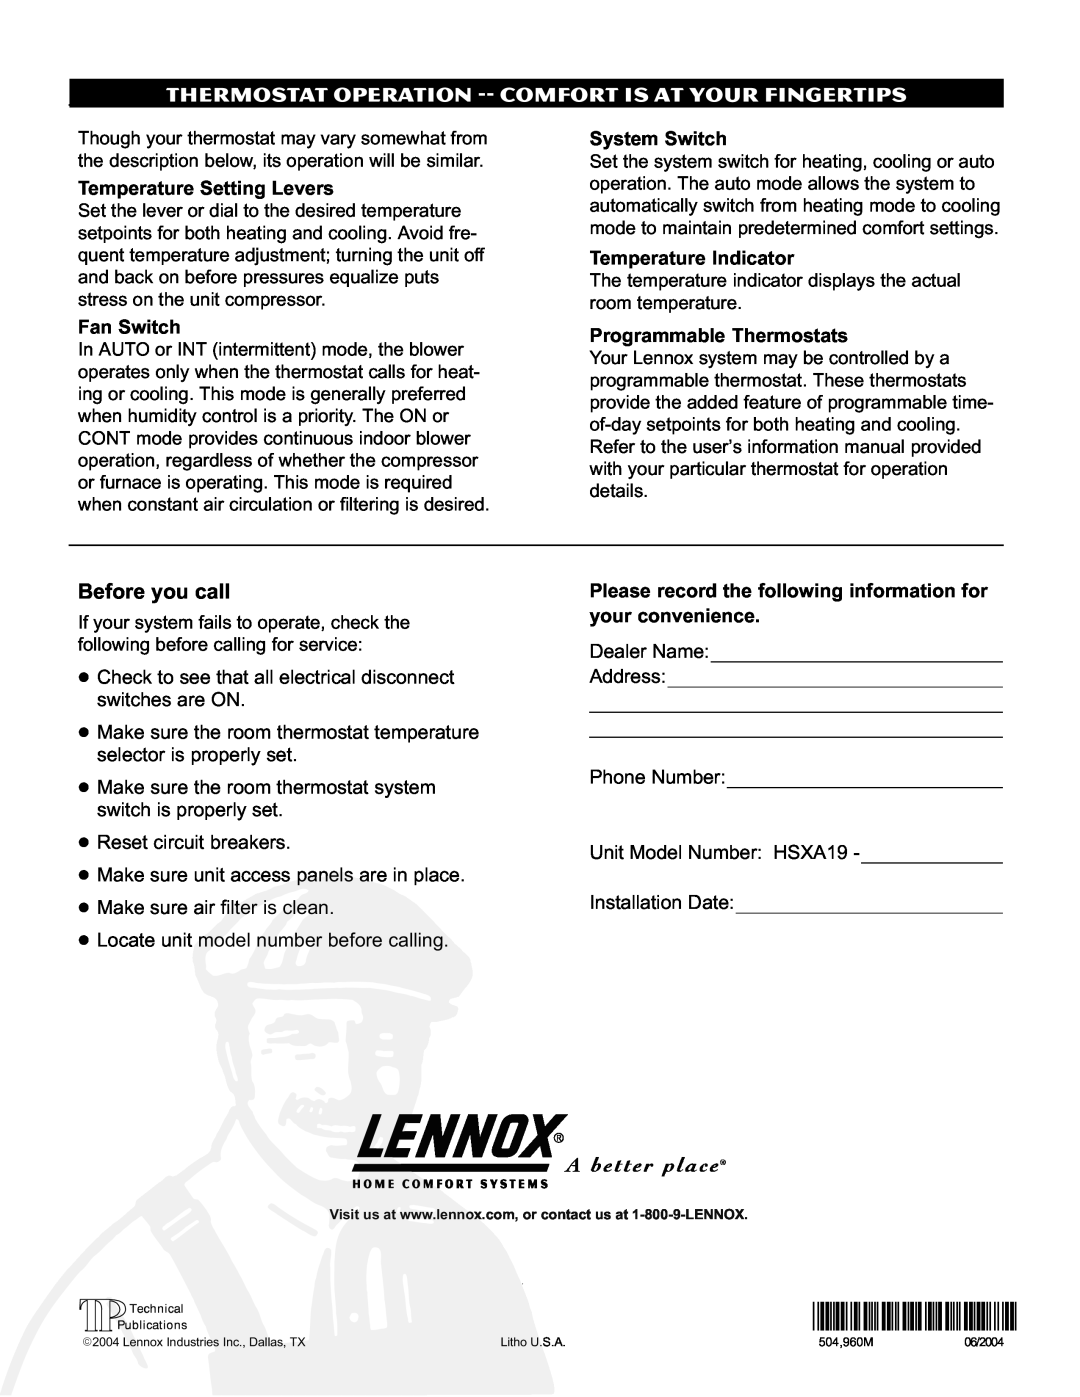 Lenoxx Electronics HSXA19 owner manual Before you call, P504960M 